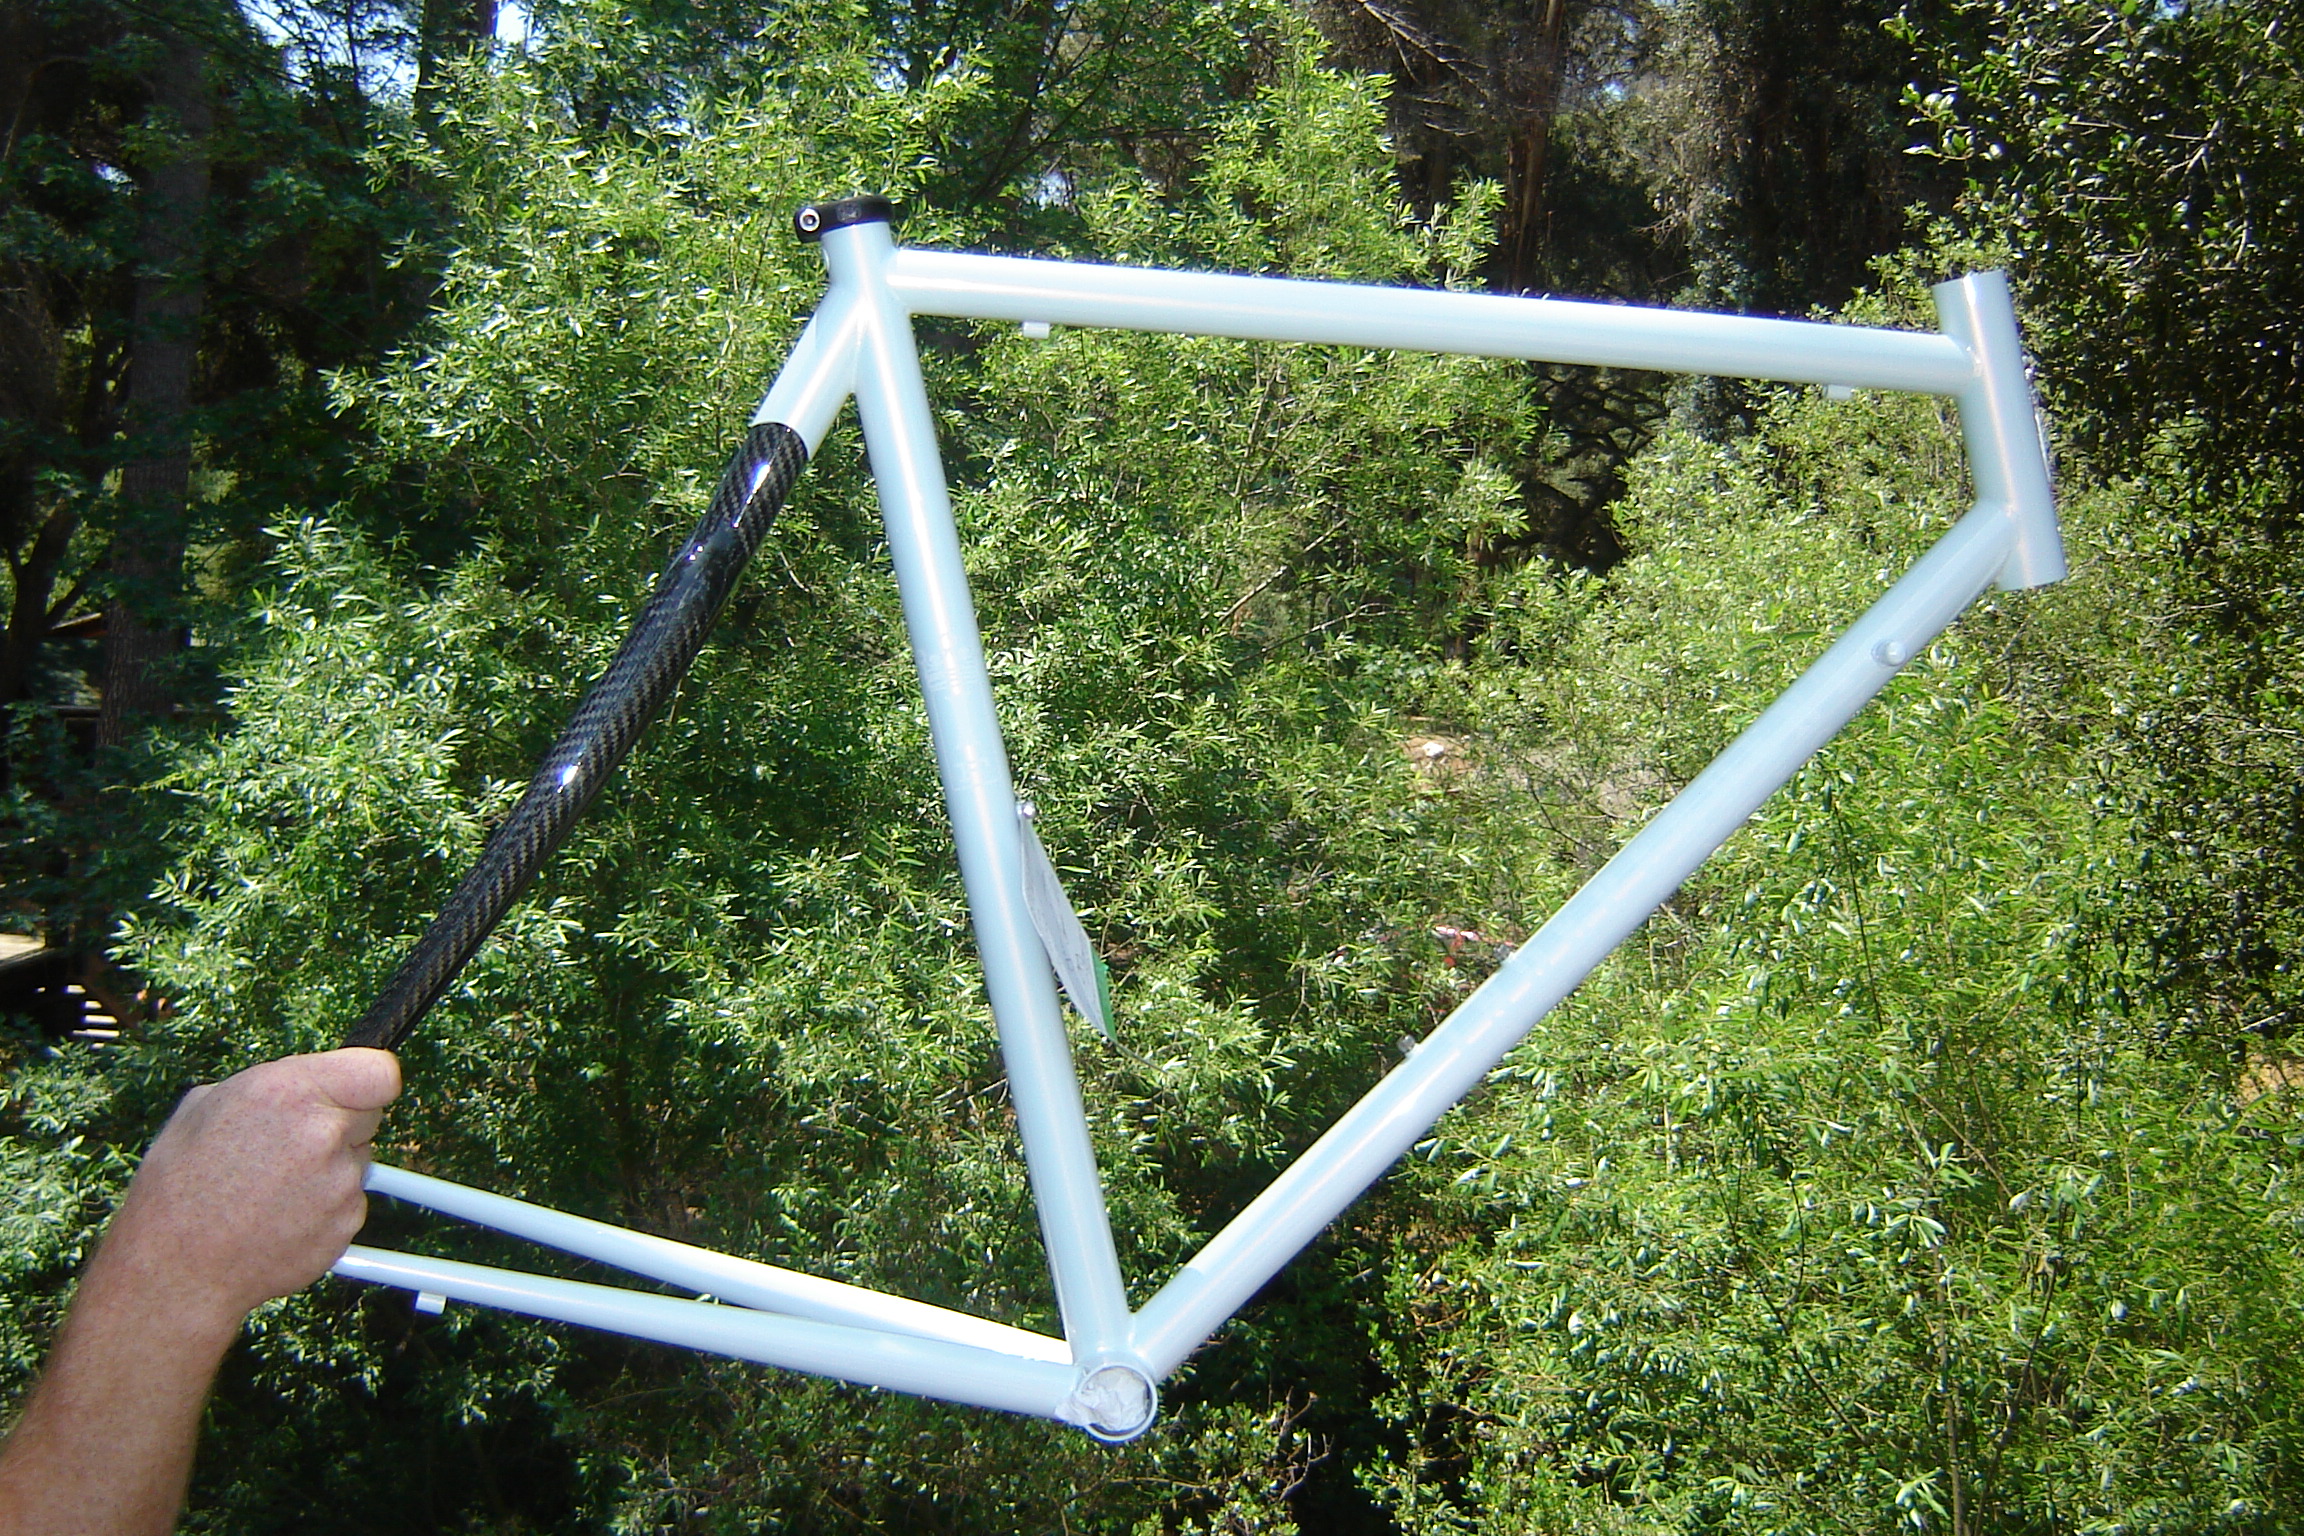 Jeff's Indepent Fabrications frame is ridiculously great. 